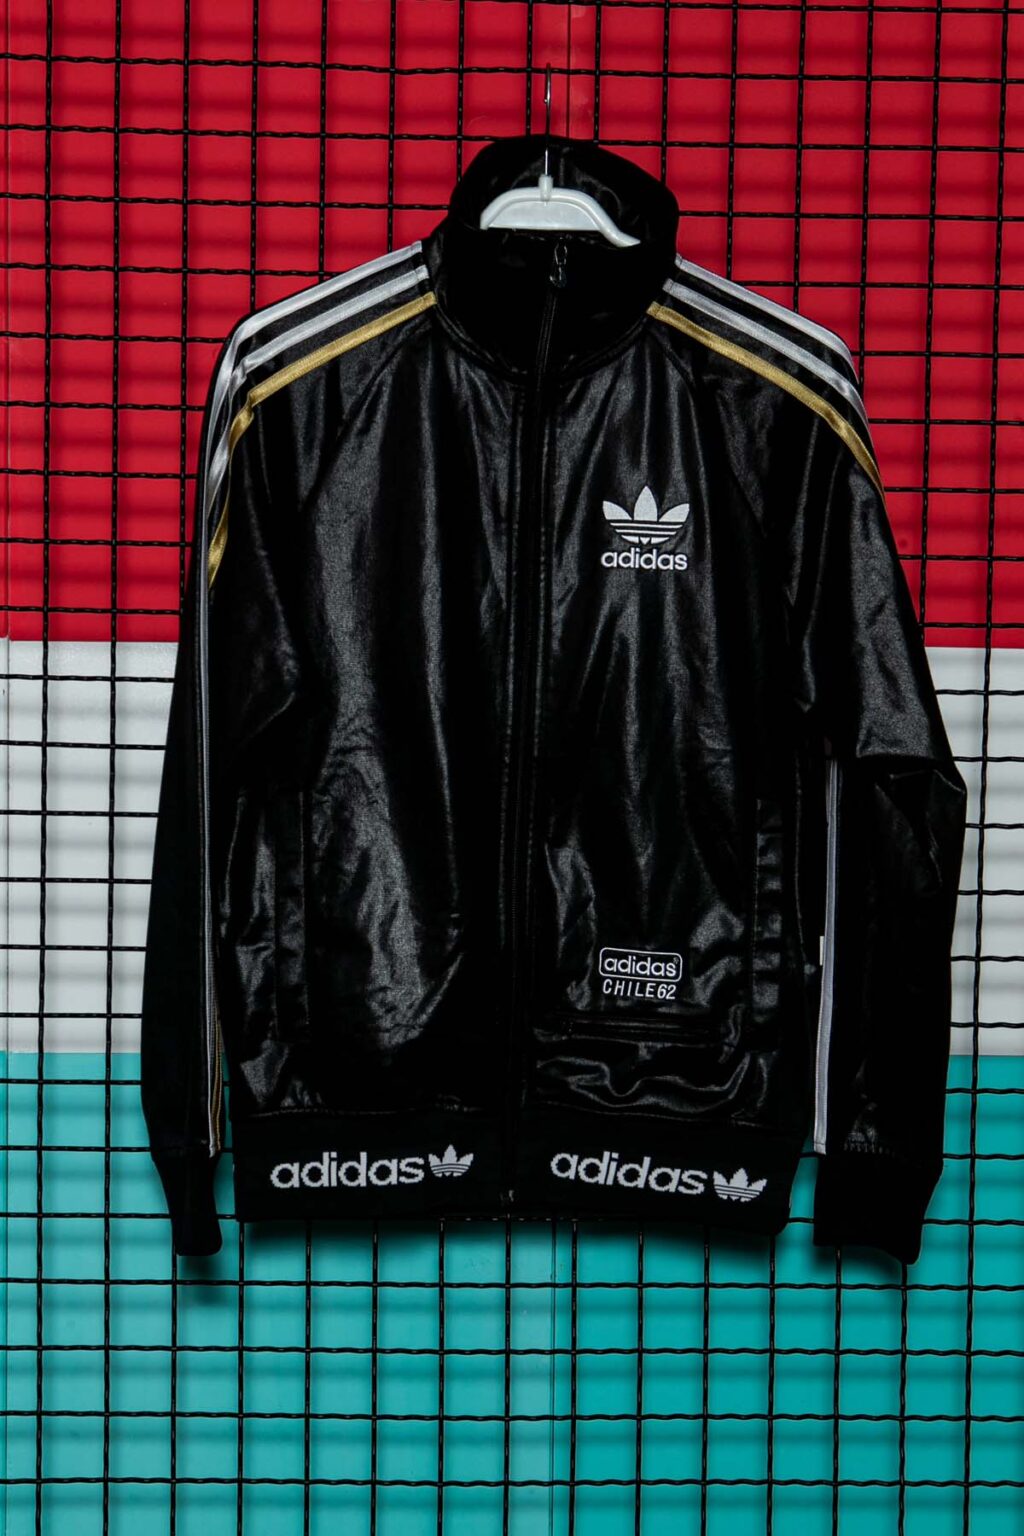 Black Adidas Chile62 Track Jacket with Gold and Silver Details